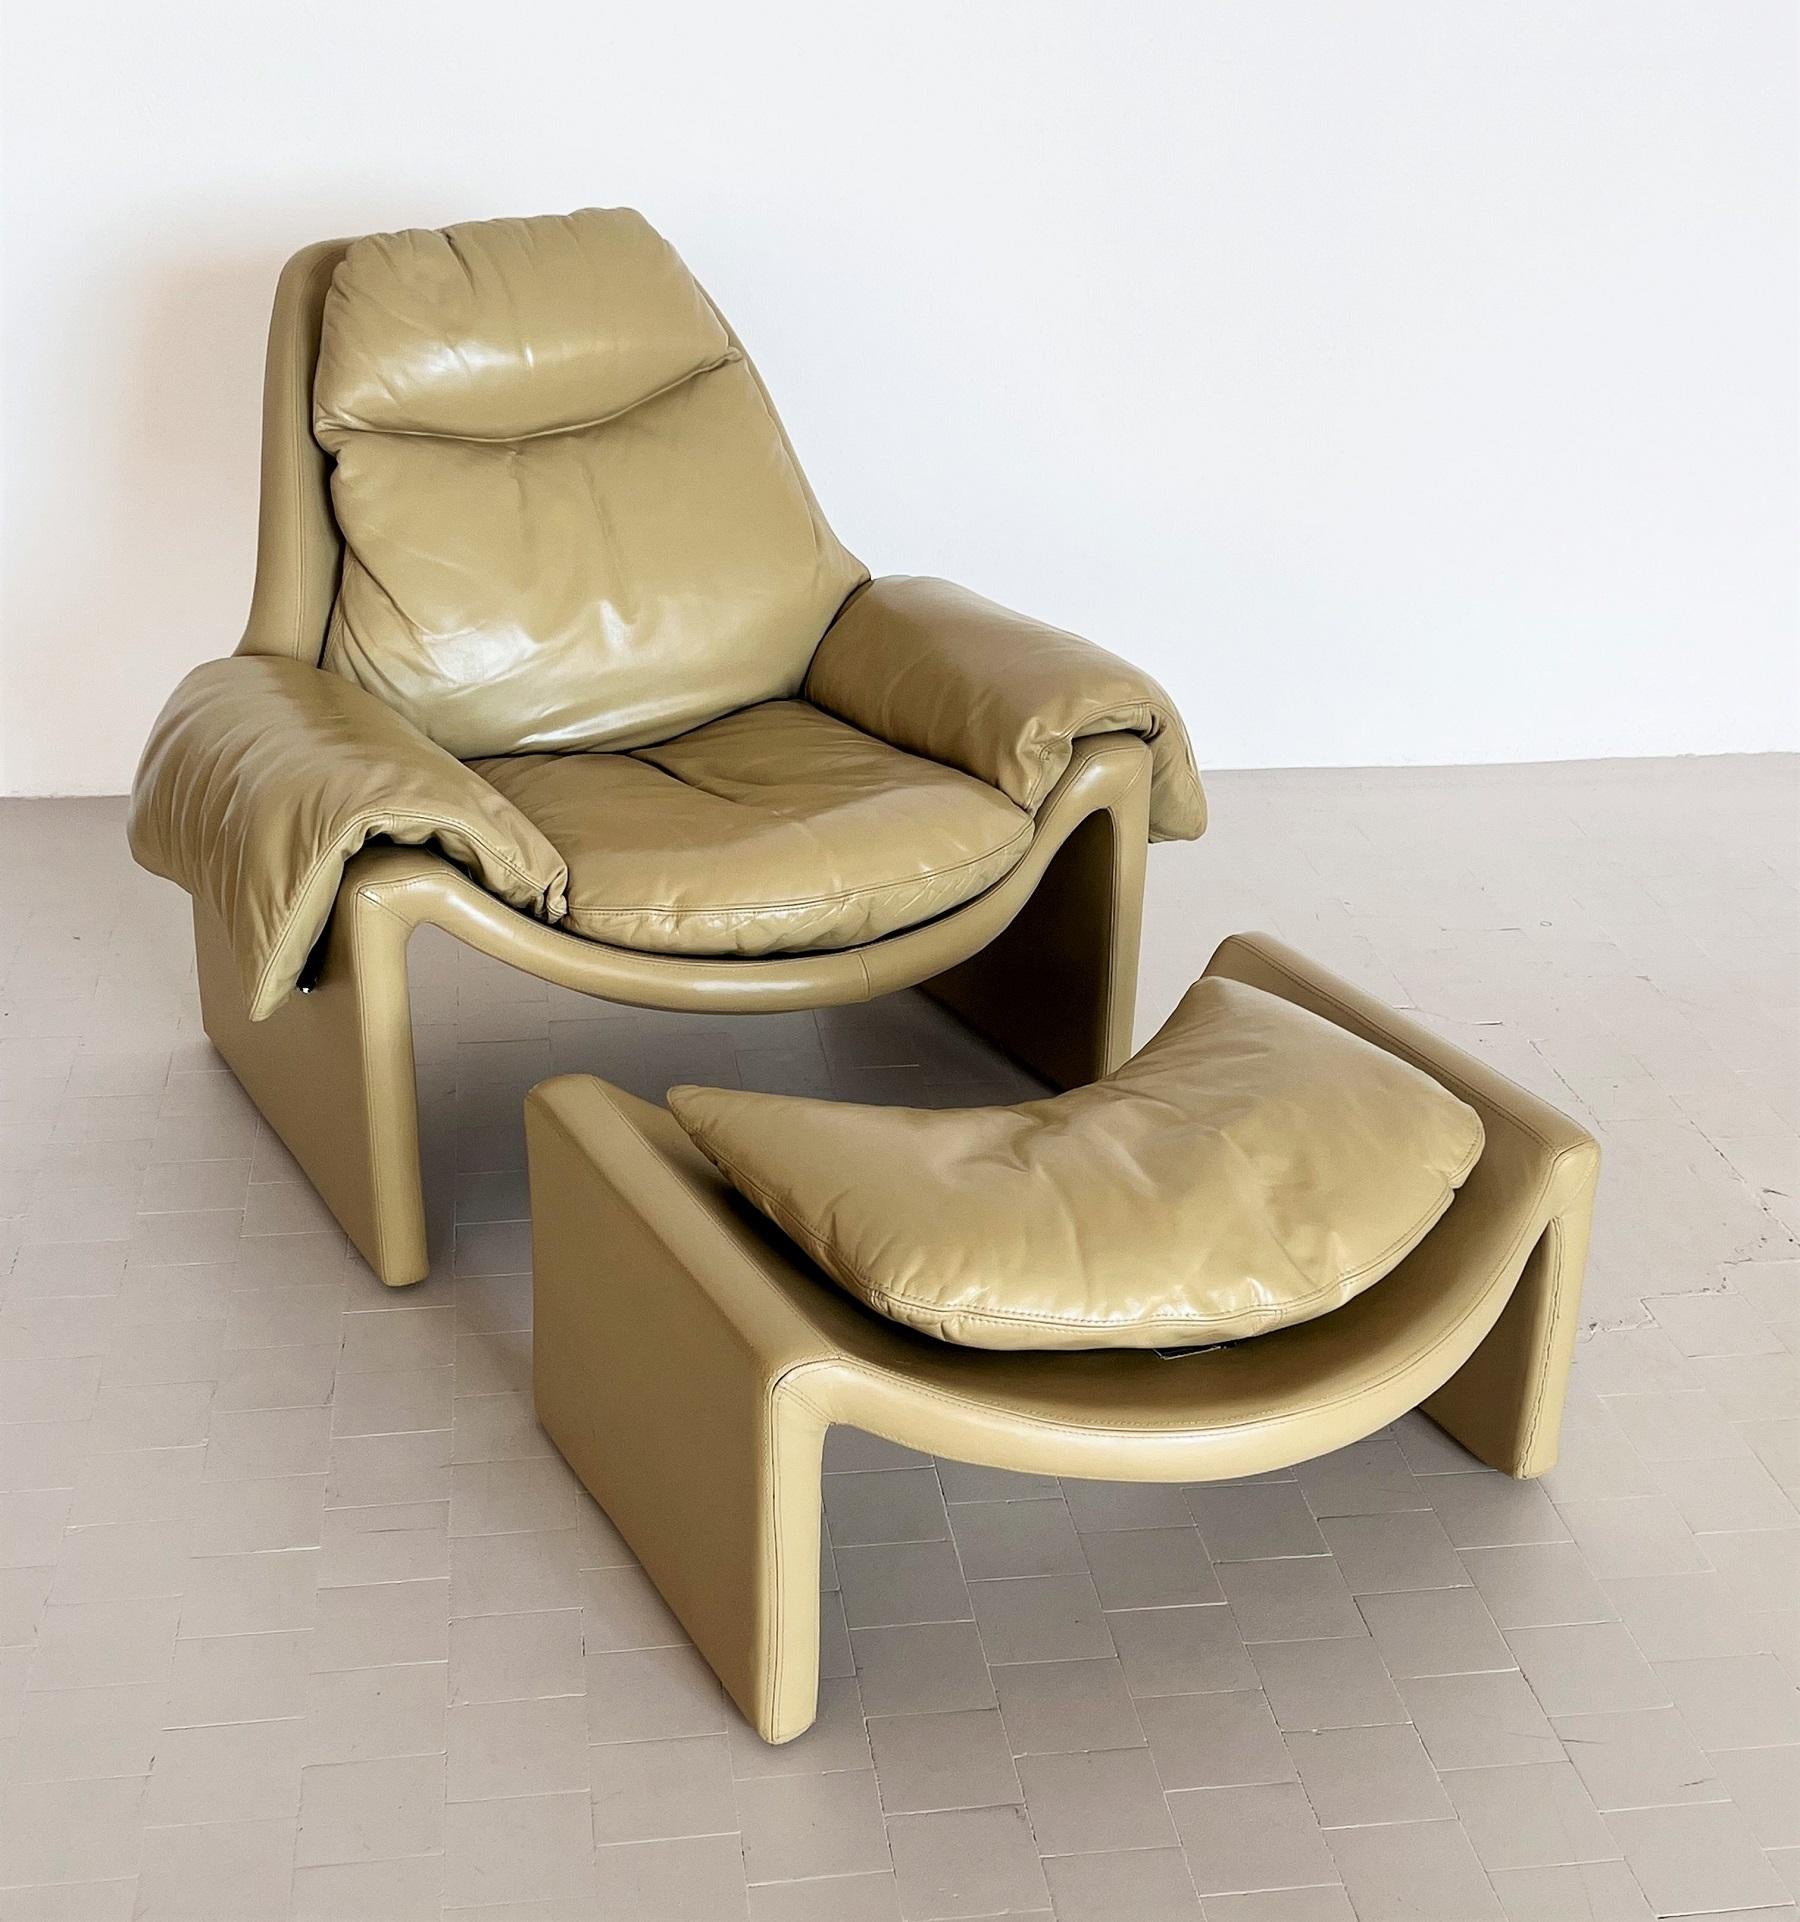 Post-Modern Vittorio Introini P60 Set of Lounge Chair with Ottoman for Saporiti, 1960s For Sale